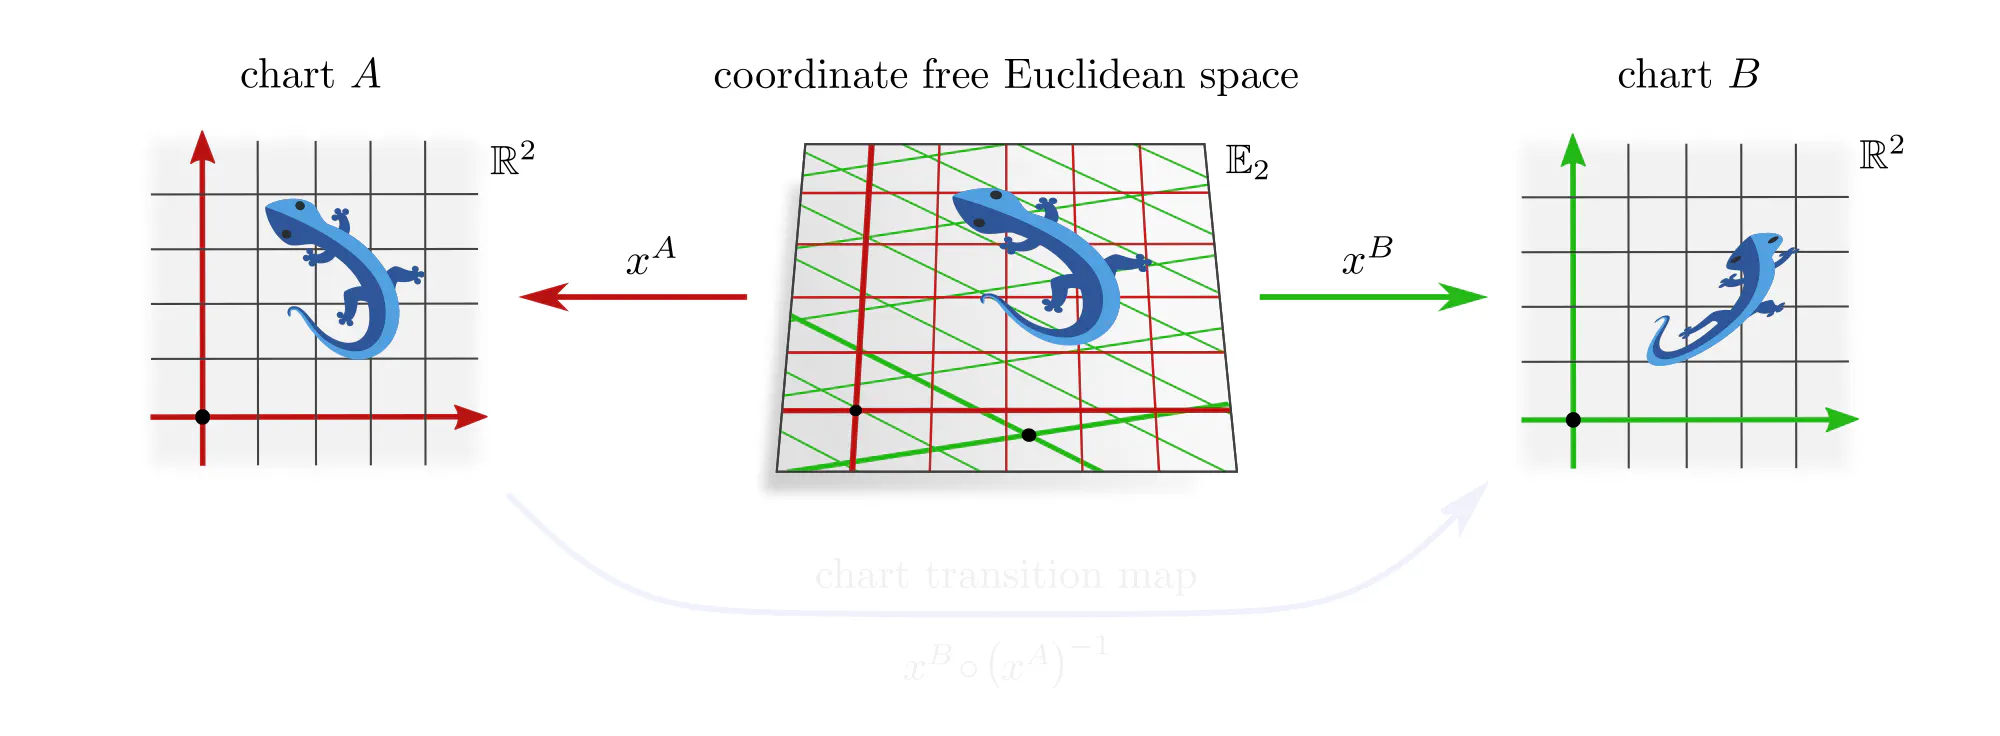 Assigning coordinates to Euclidean spaces, slide 3